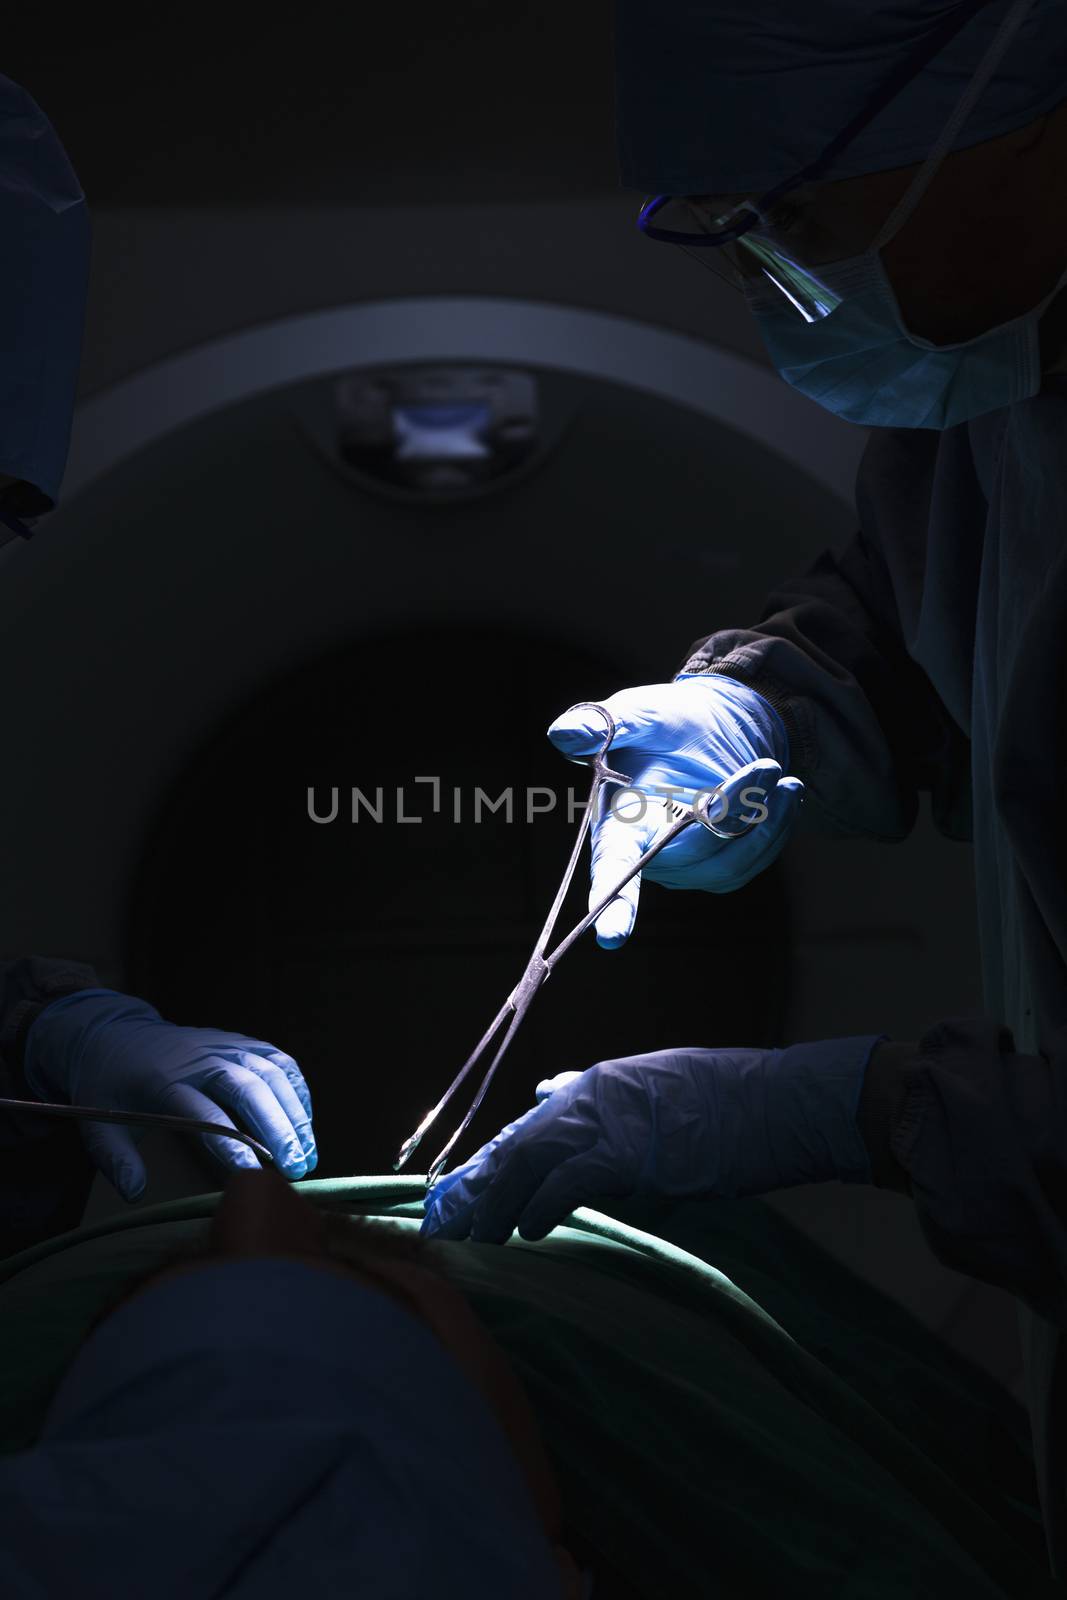 Surgeon looking down, working, and holding surgical equipment with patient lying on the operating table, dark